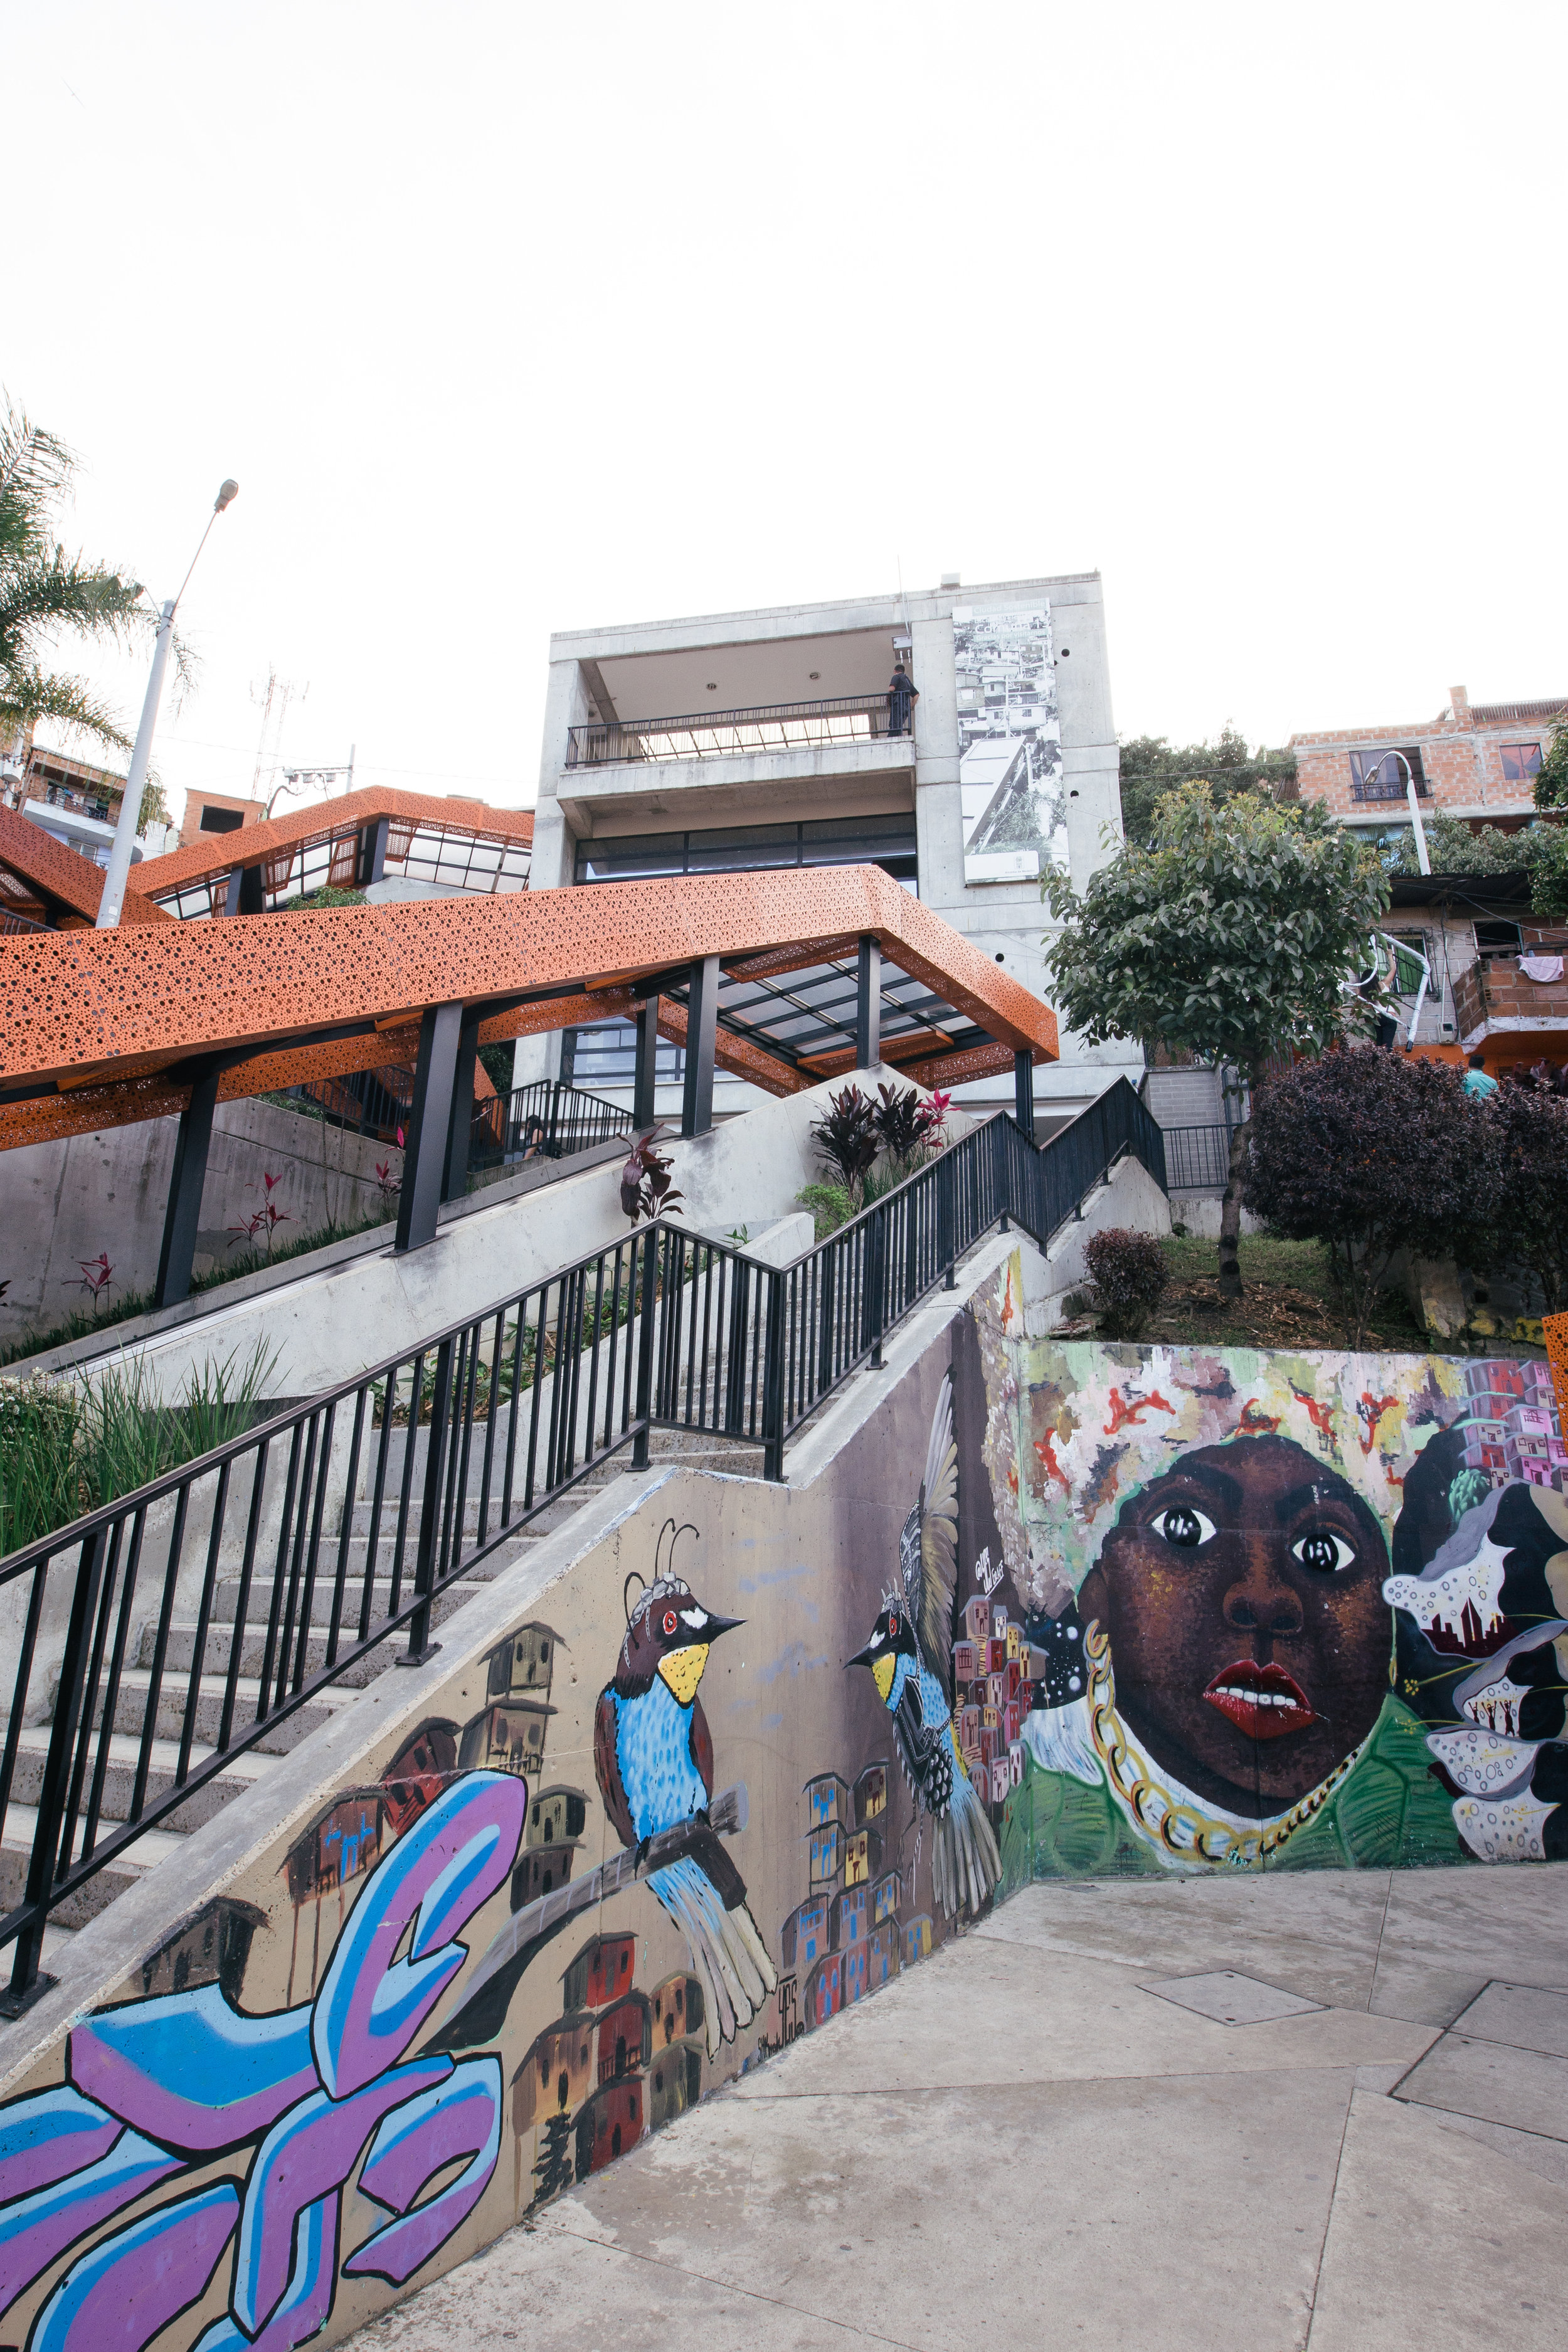  Six escalators scaling 384 meters run the hills in Comuna 13, a once dangerous and inaccessible area run primarily by drug traffickers and guerillas. It's an innovative urban project that has helped open the neighbourhood to new people and fresh ideas, and allowed tourism and enterprise to grow. 